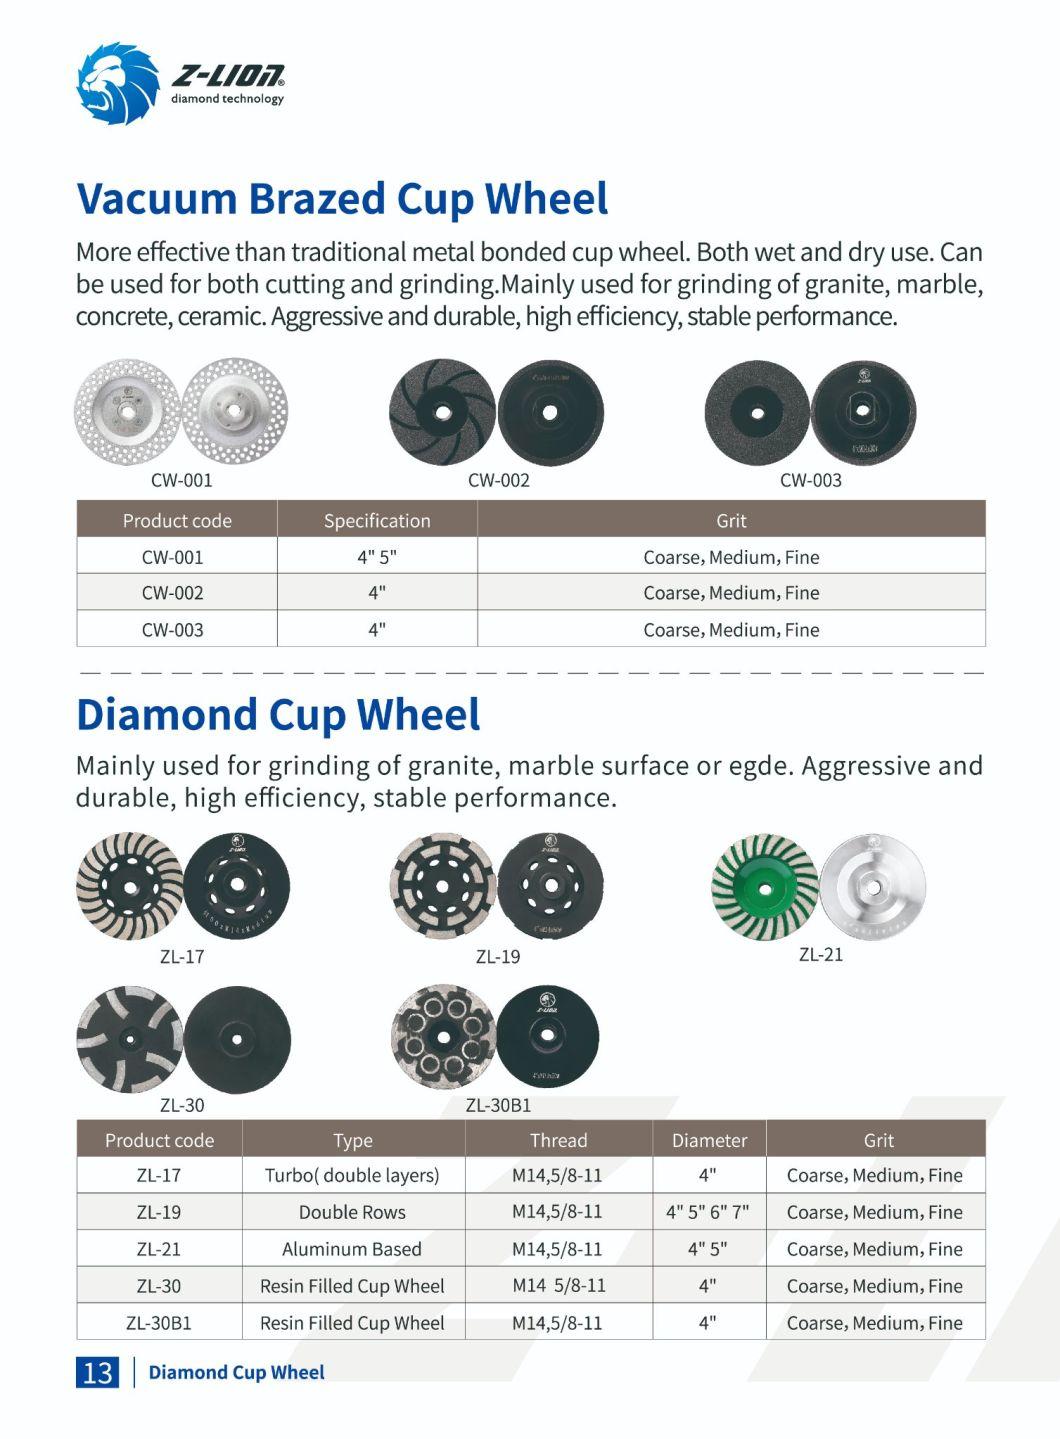 Turbo Diamond Cup Wheel for Grinding of Granite, Marble Surface and Edge